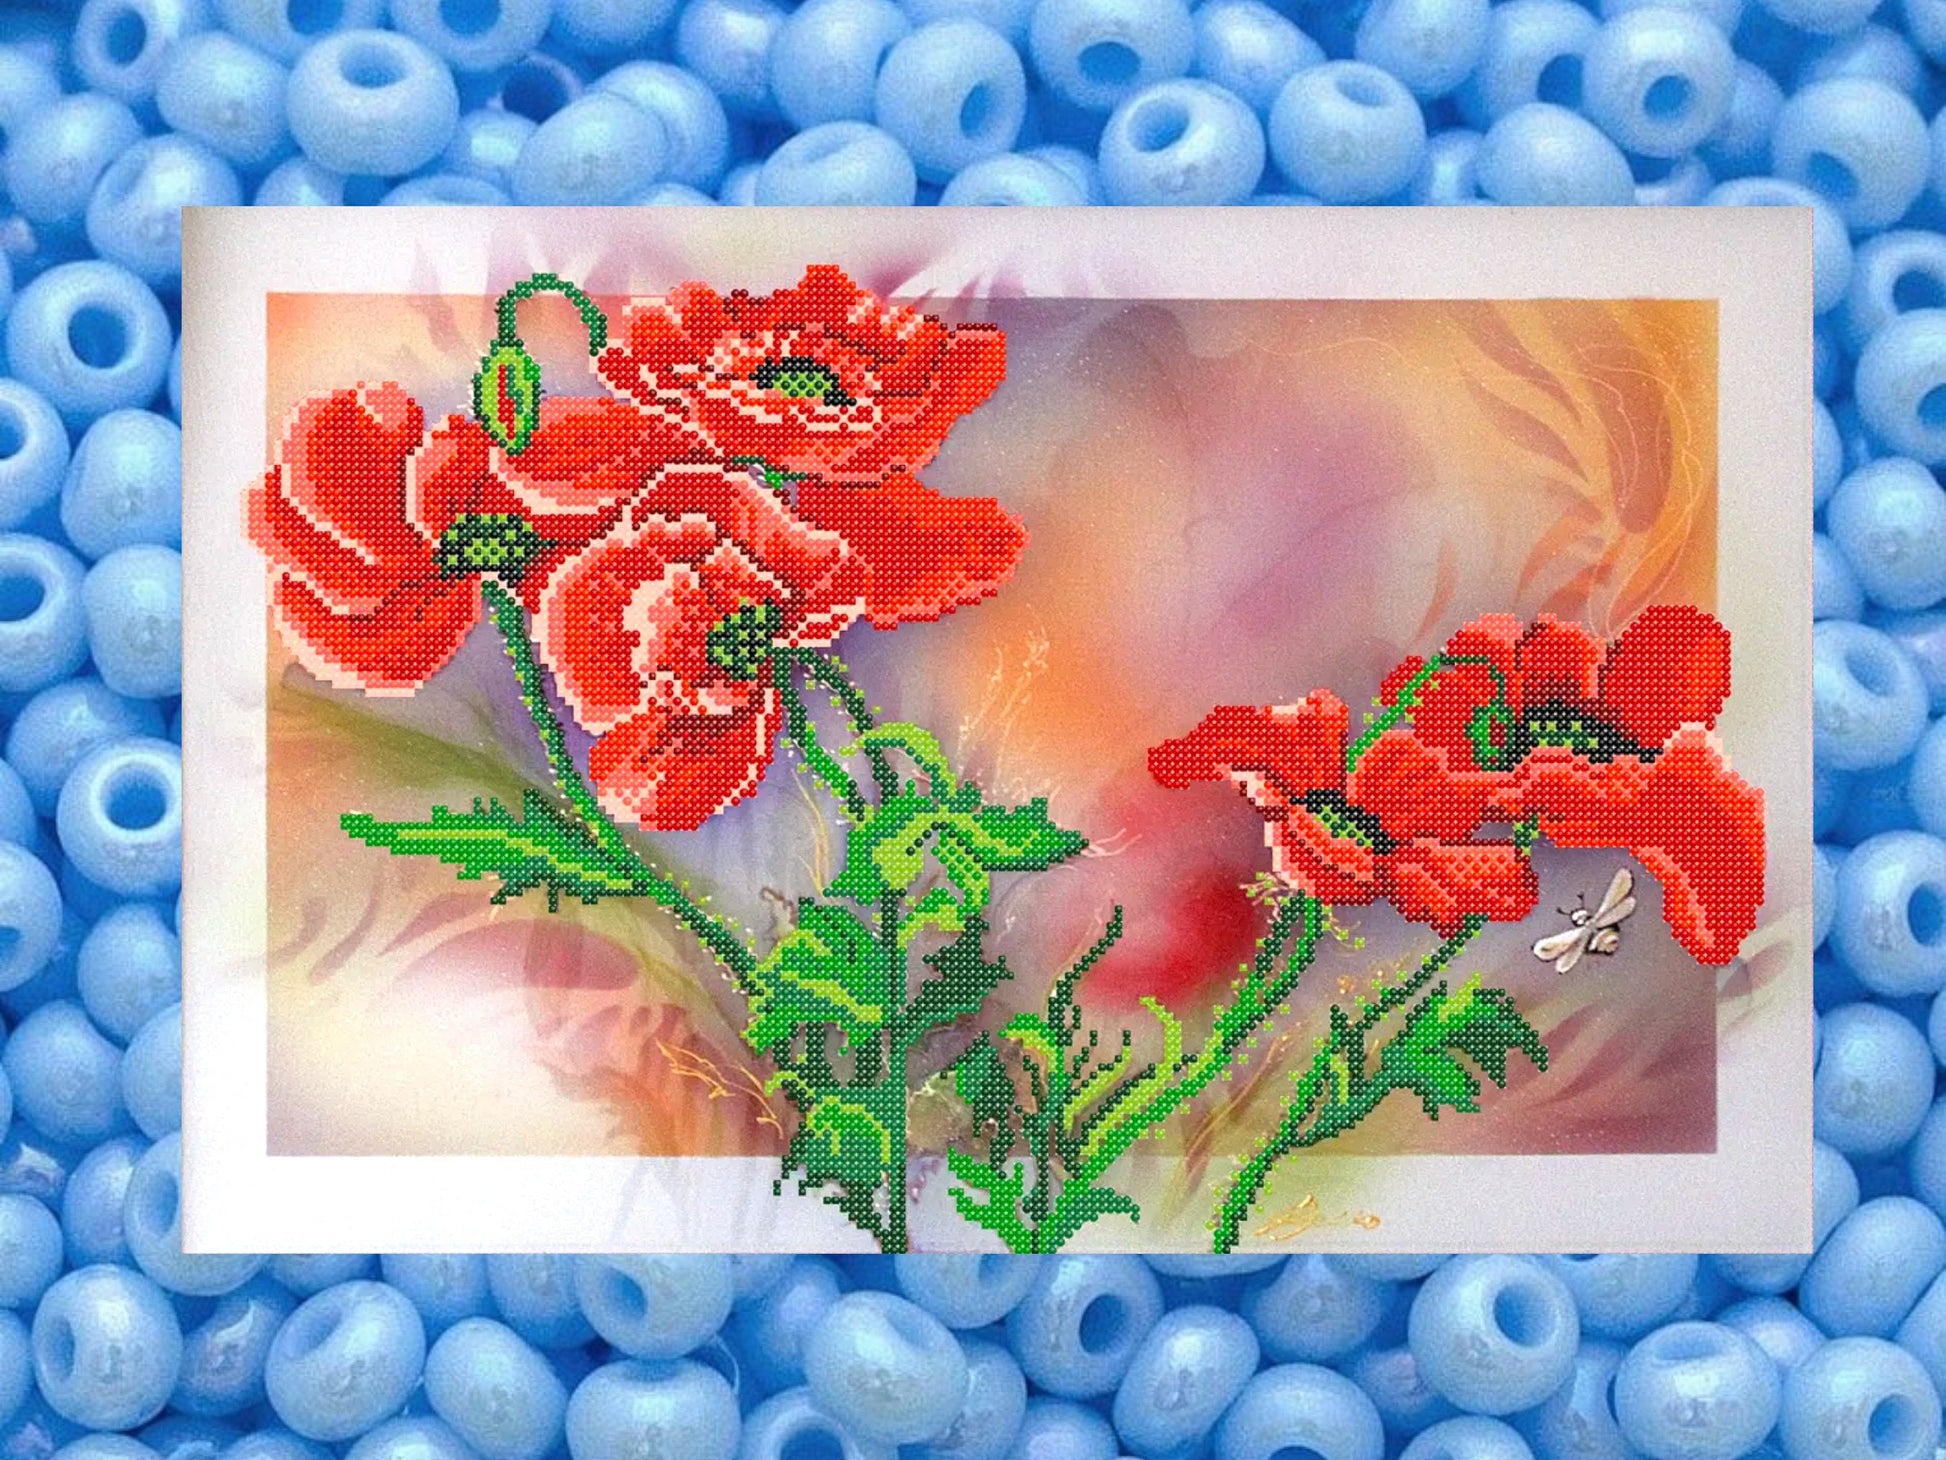 Creative Crafting: DIY Bead Embroidery Kit featuring Red Poppies - VadymShop